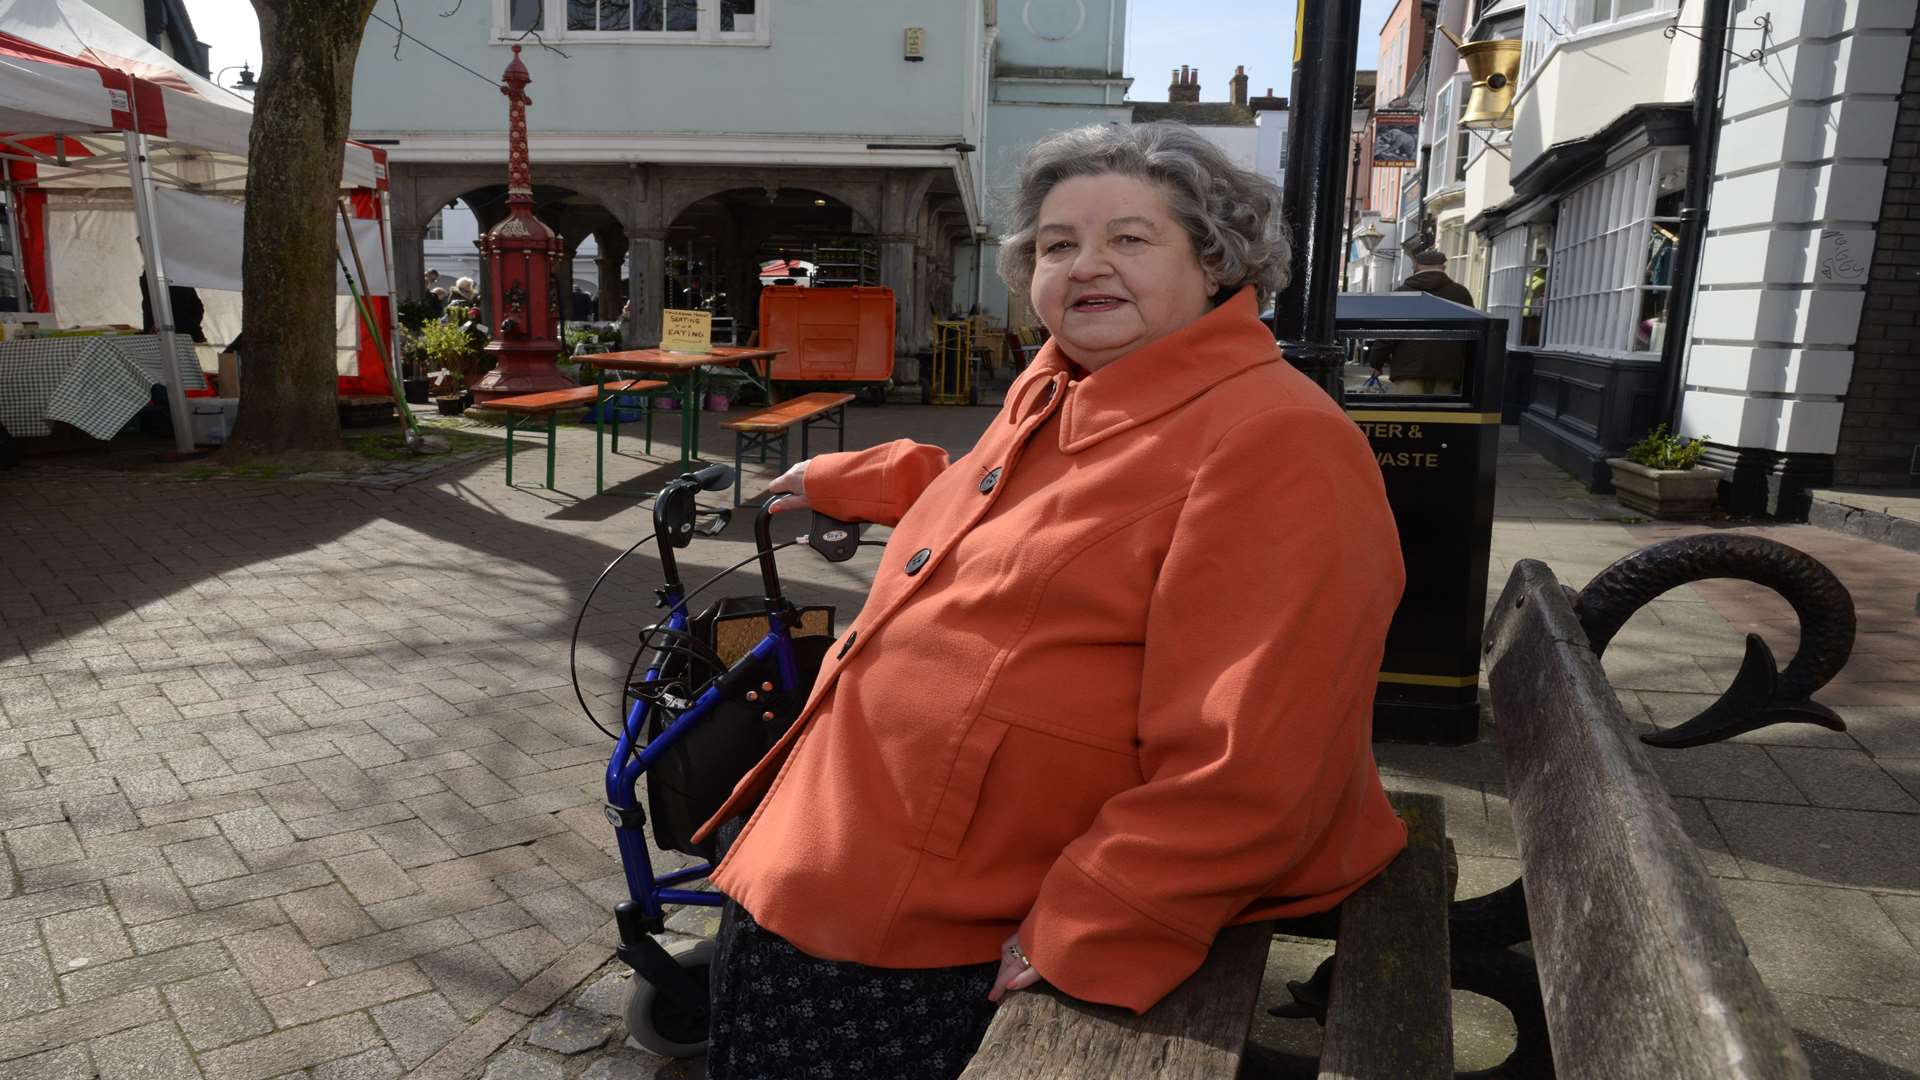 Cllr Anita Walker is calling for more benches in the town centre.